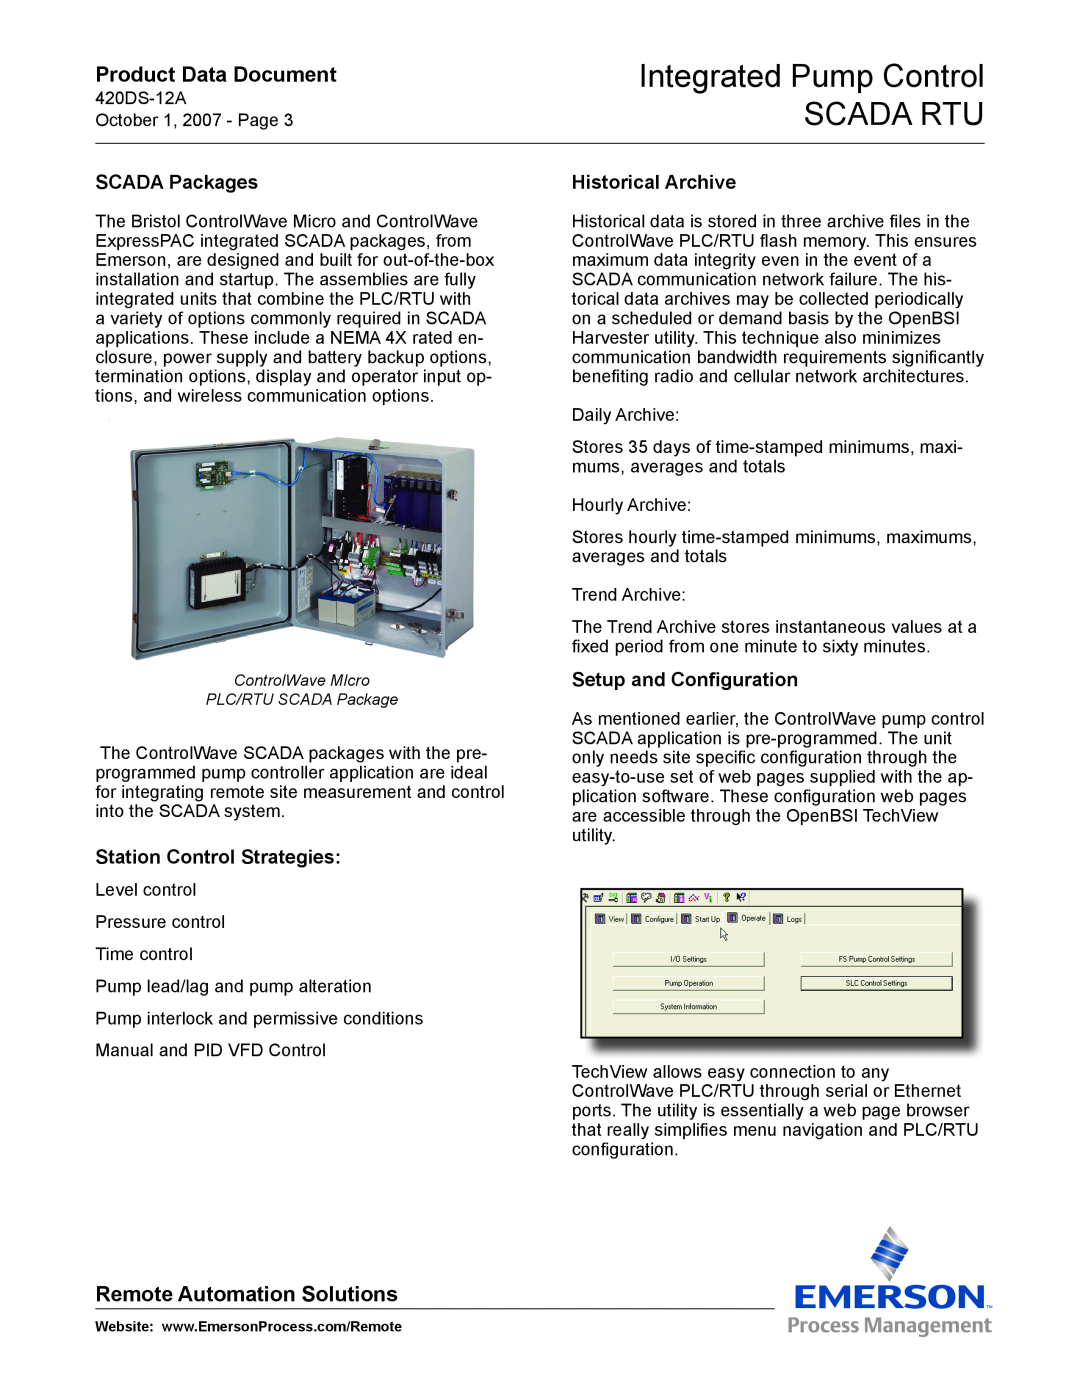 Emerson Process Management SCADA RTU SCADA Packages, Station Control Strategies, Historical Archive, Product Data Document 